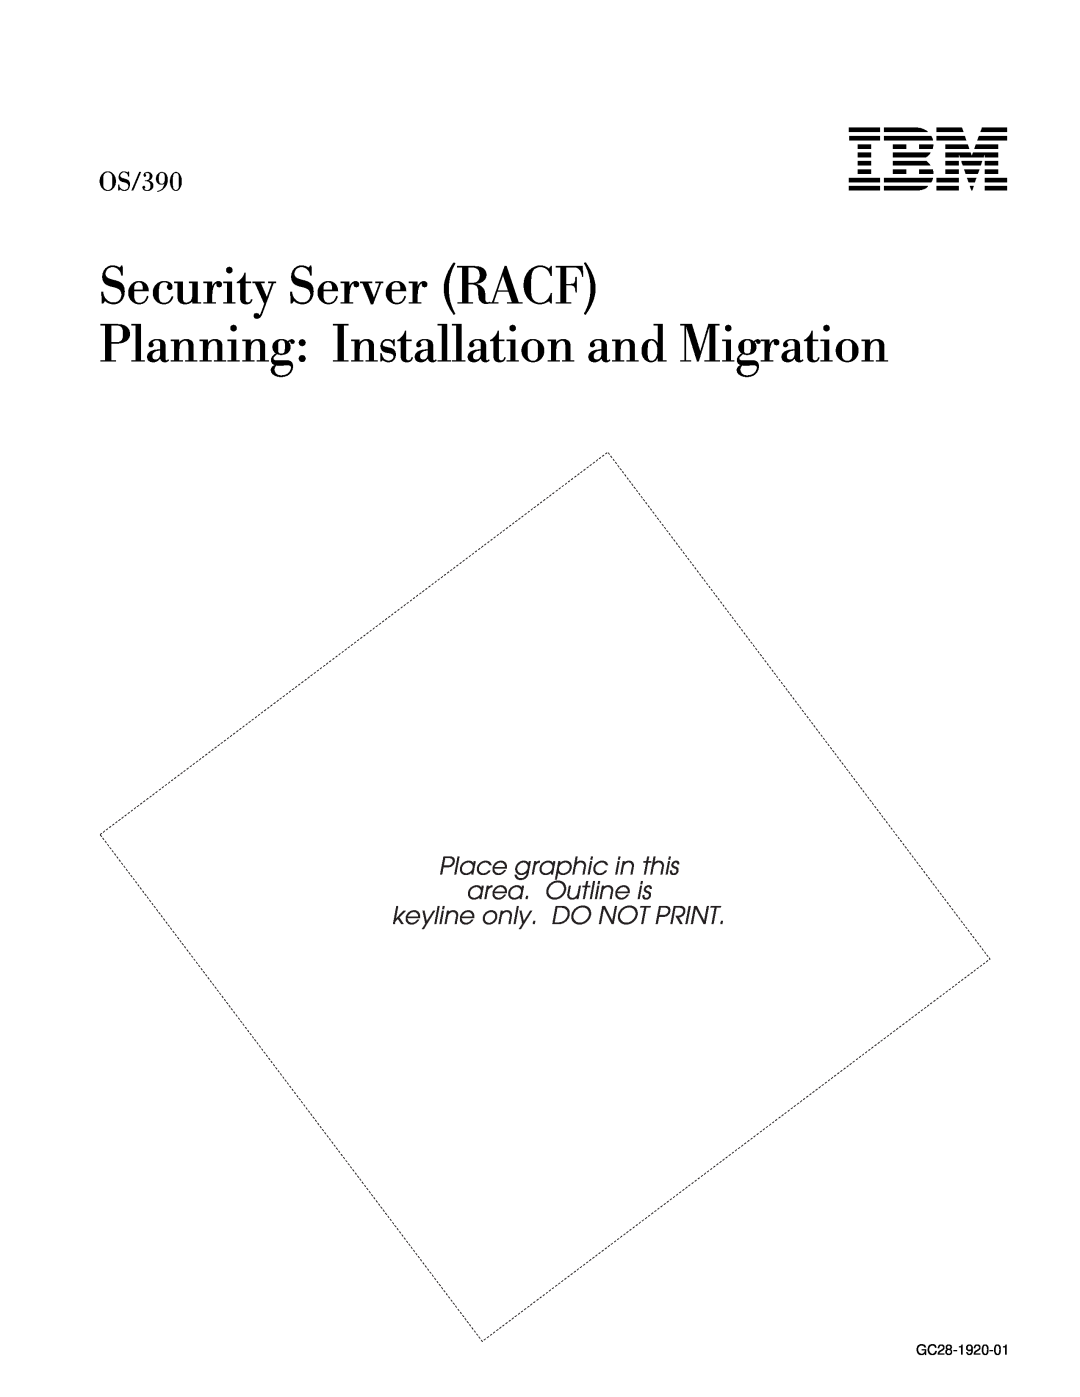 IBM GC28-1920-01 manual Security Server RACF Planning Installation and Migration, OS/390 